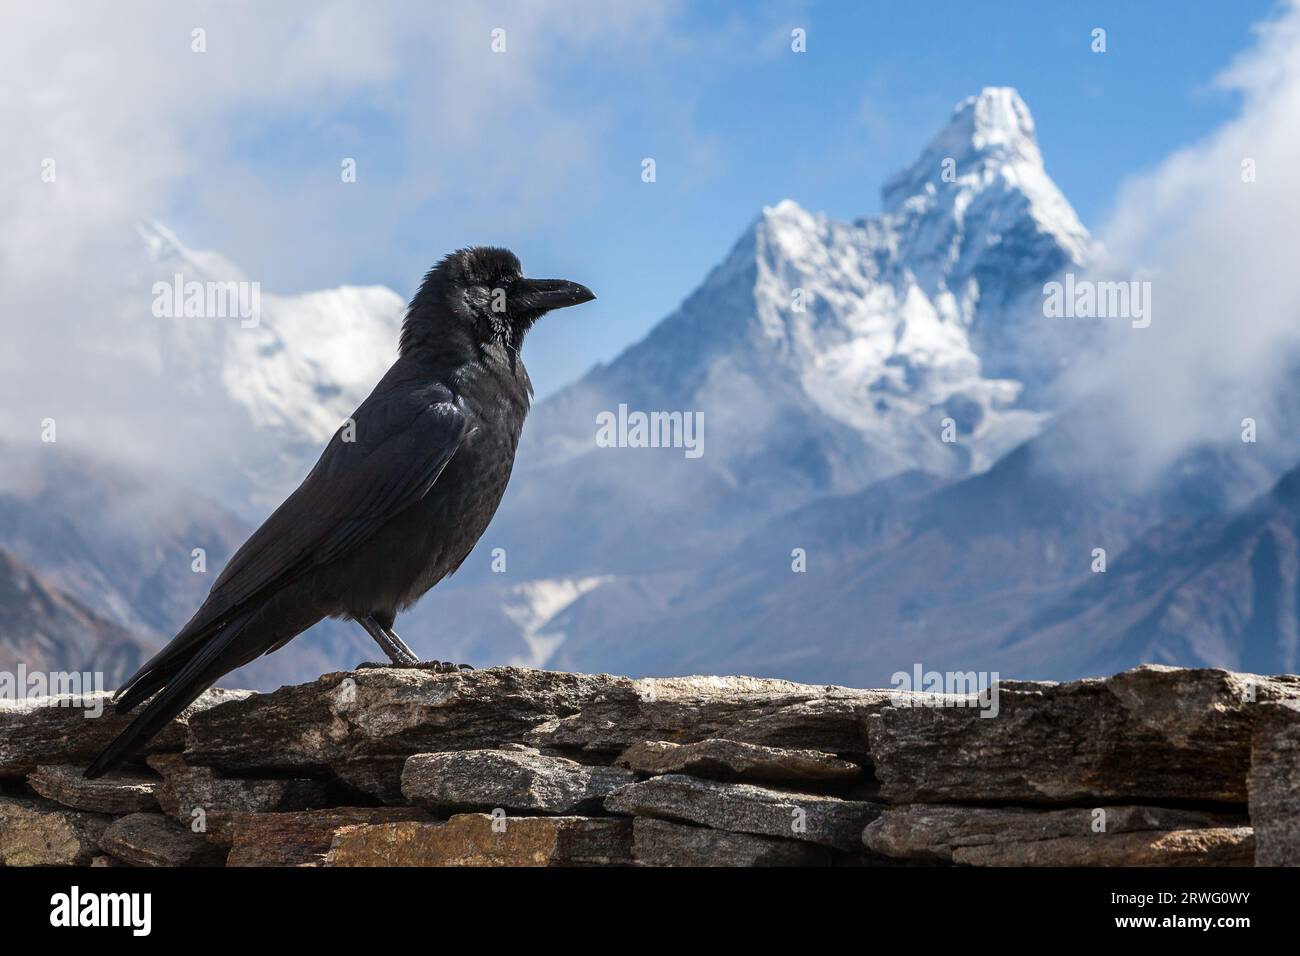 Black raven in Himalayas posing in front of Ama Dablam mountain on Everest base camp trek. Stock Photo